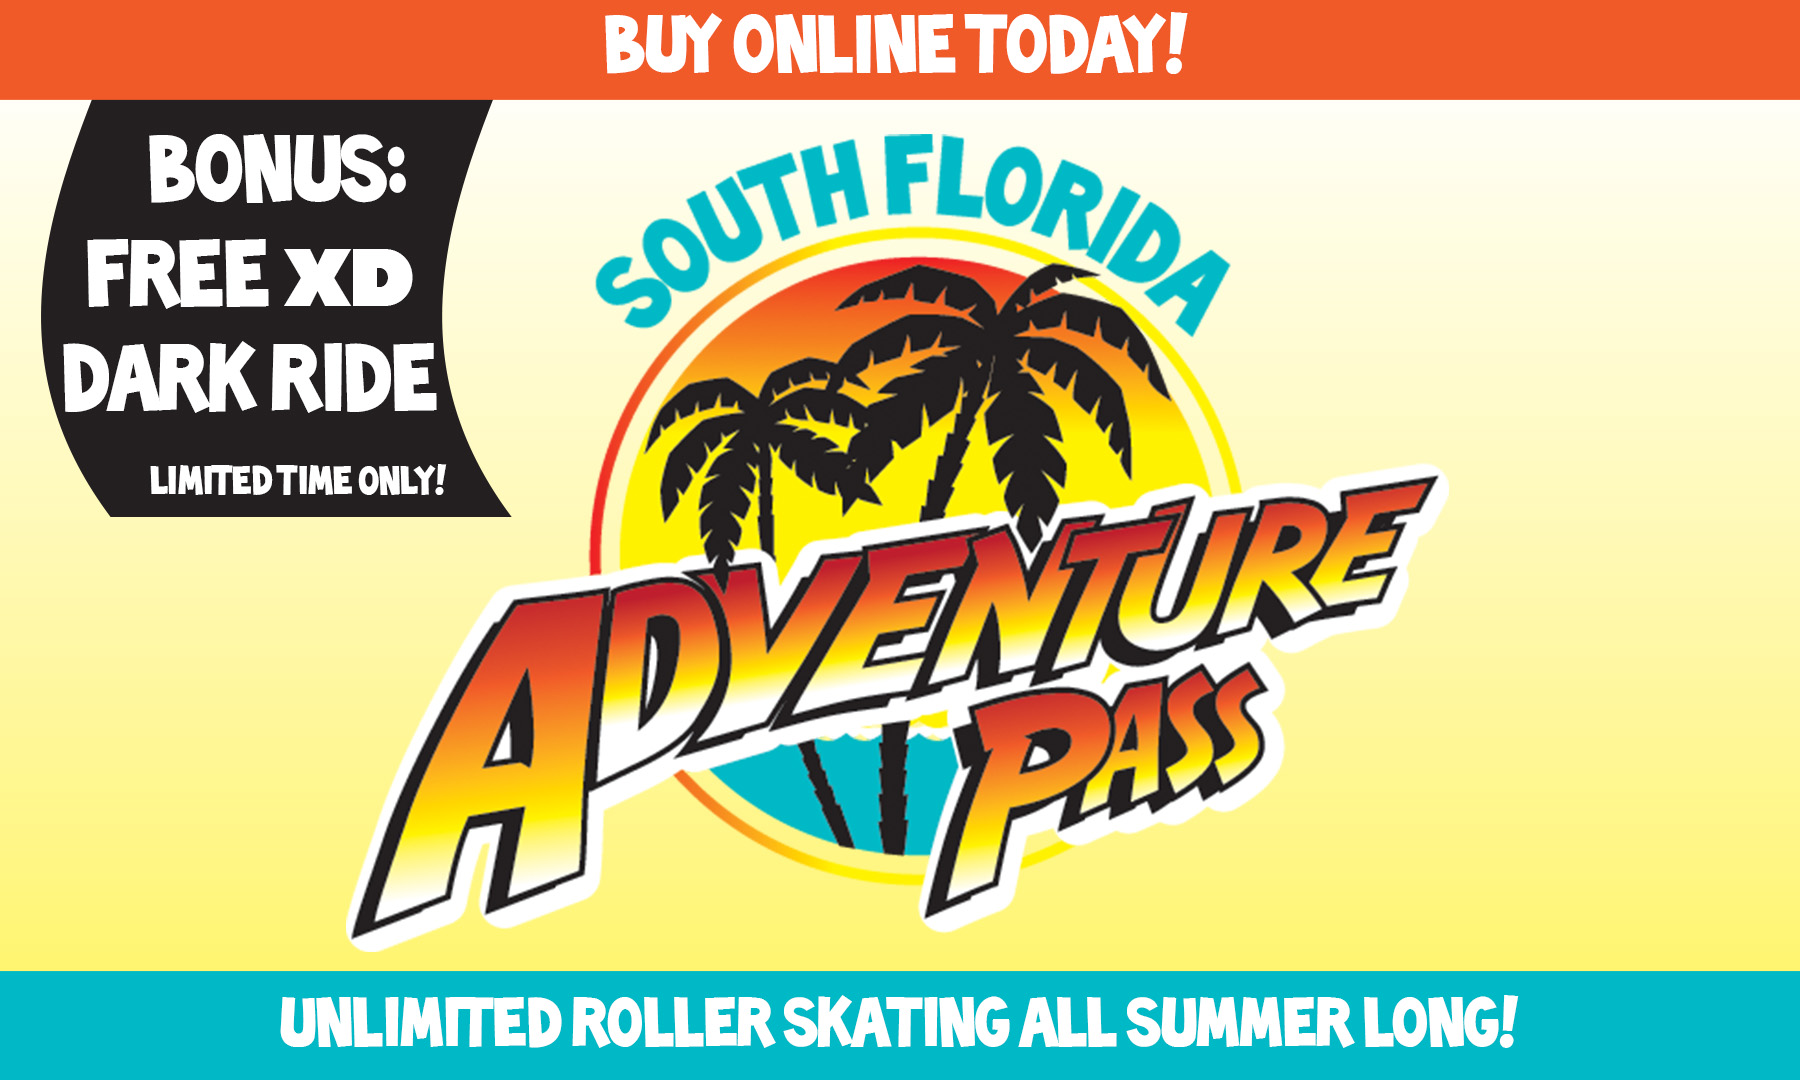 Unlimited Roller Skating with South Florida Adventure Pass